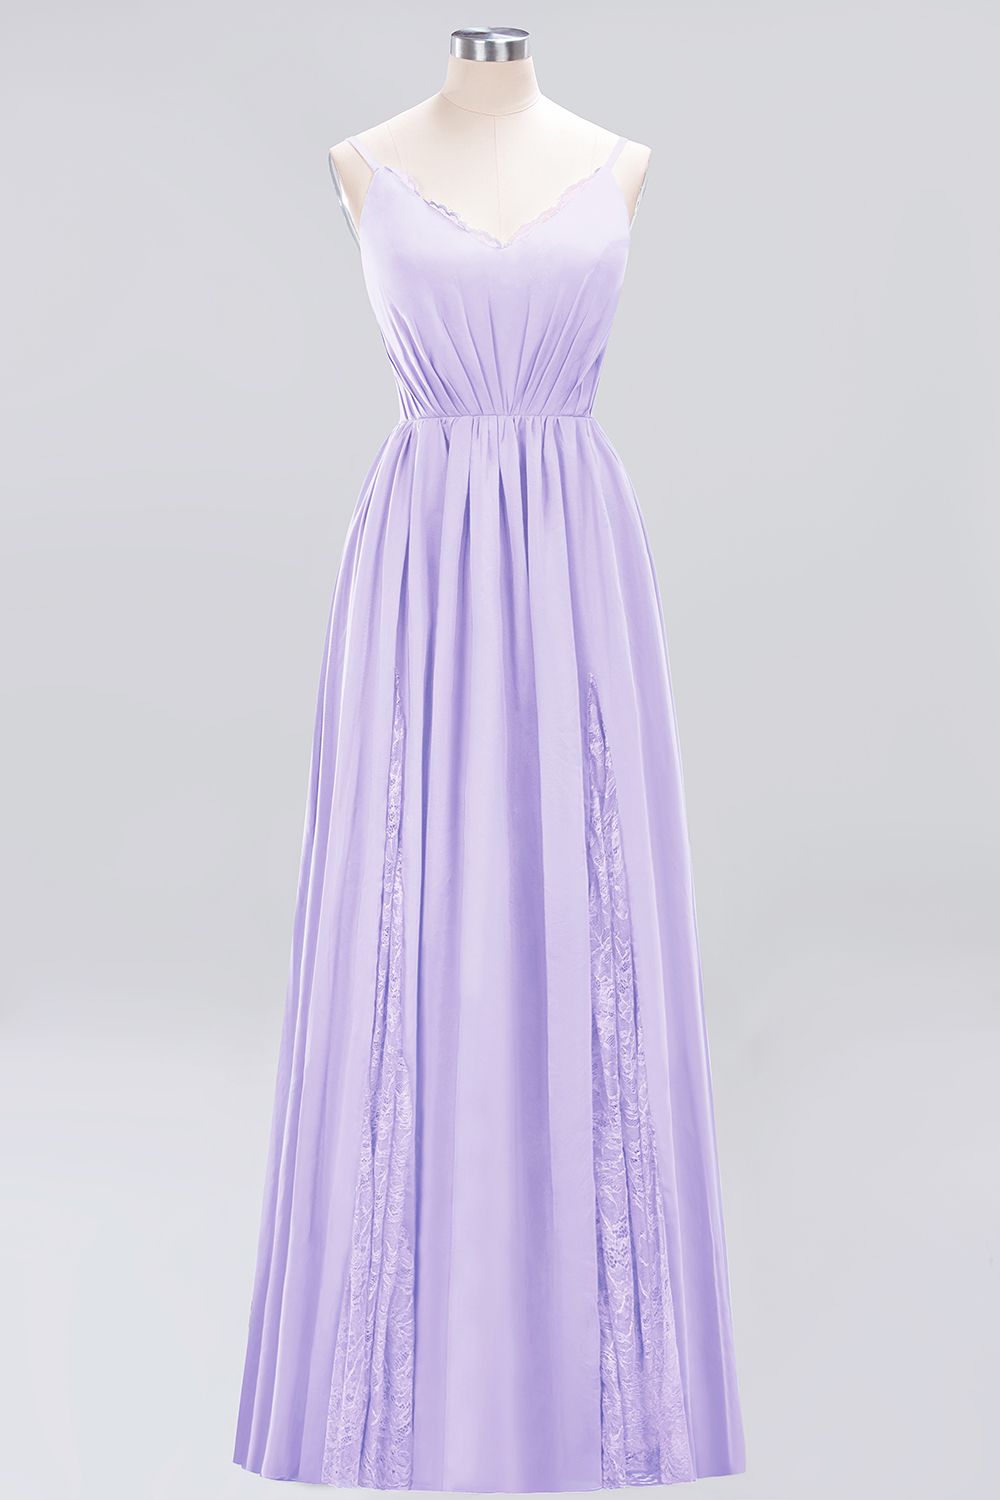 Load image into Gallery viewer, Elegant Spaghetti Straps Long Bridesmaid Dress Lace V-Neck Maid of Honor Dress-27dress
